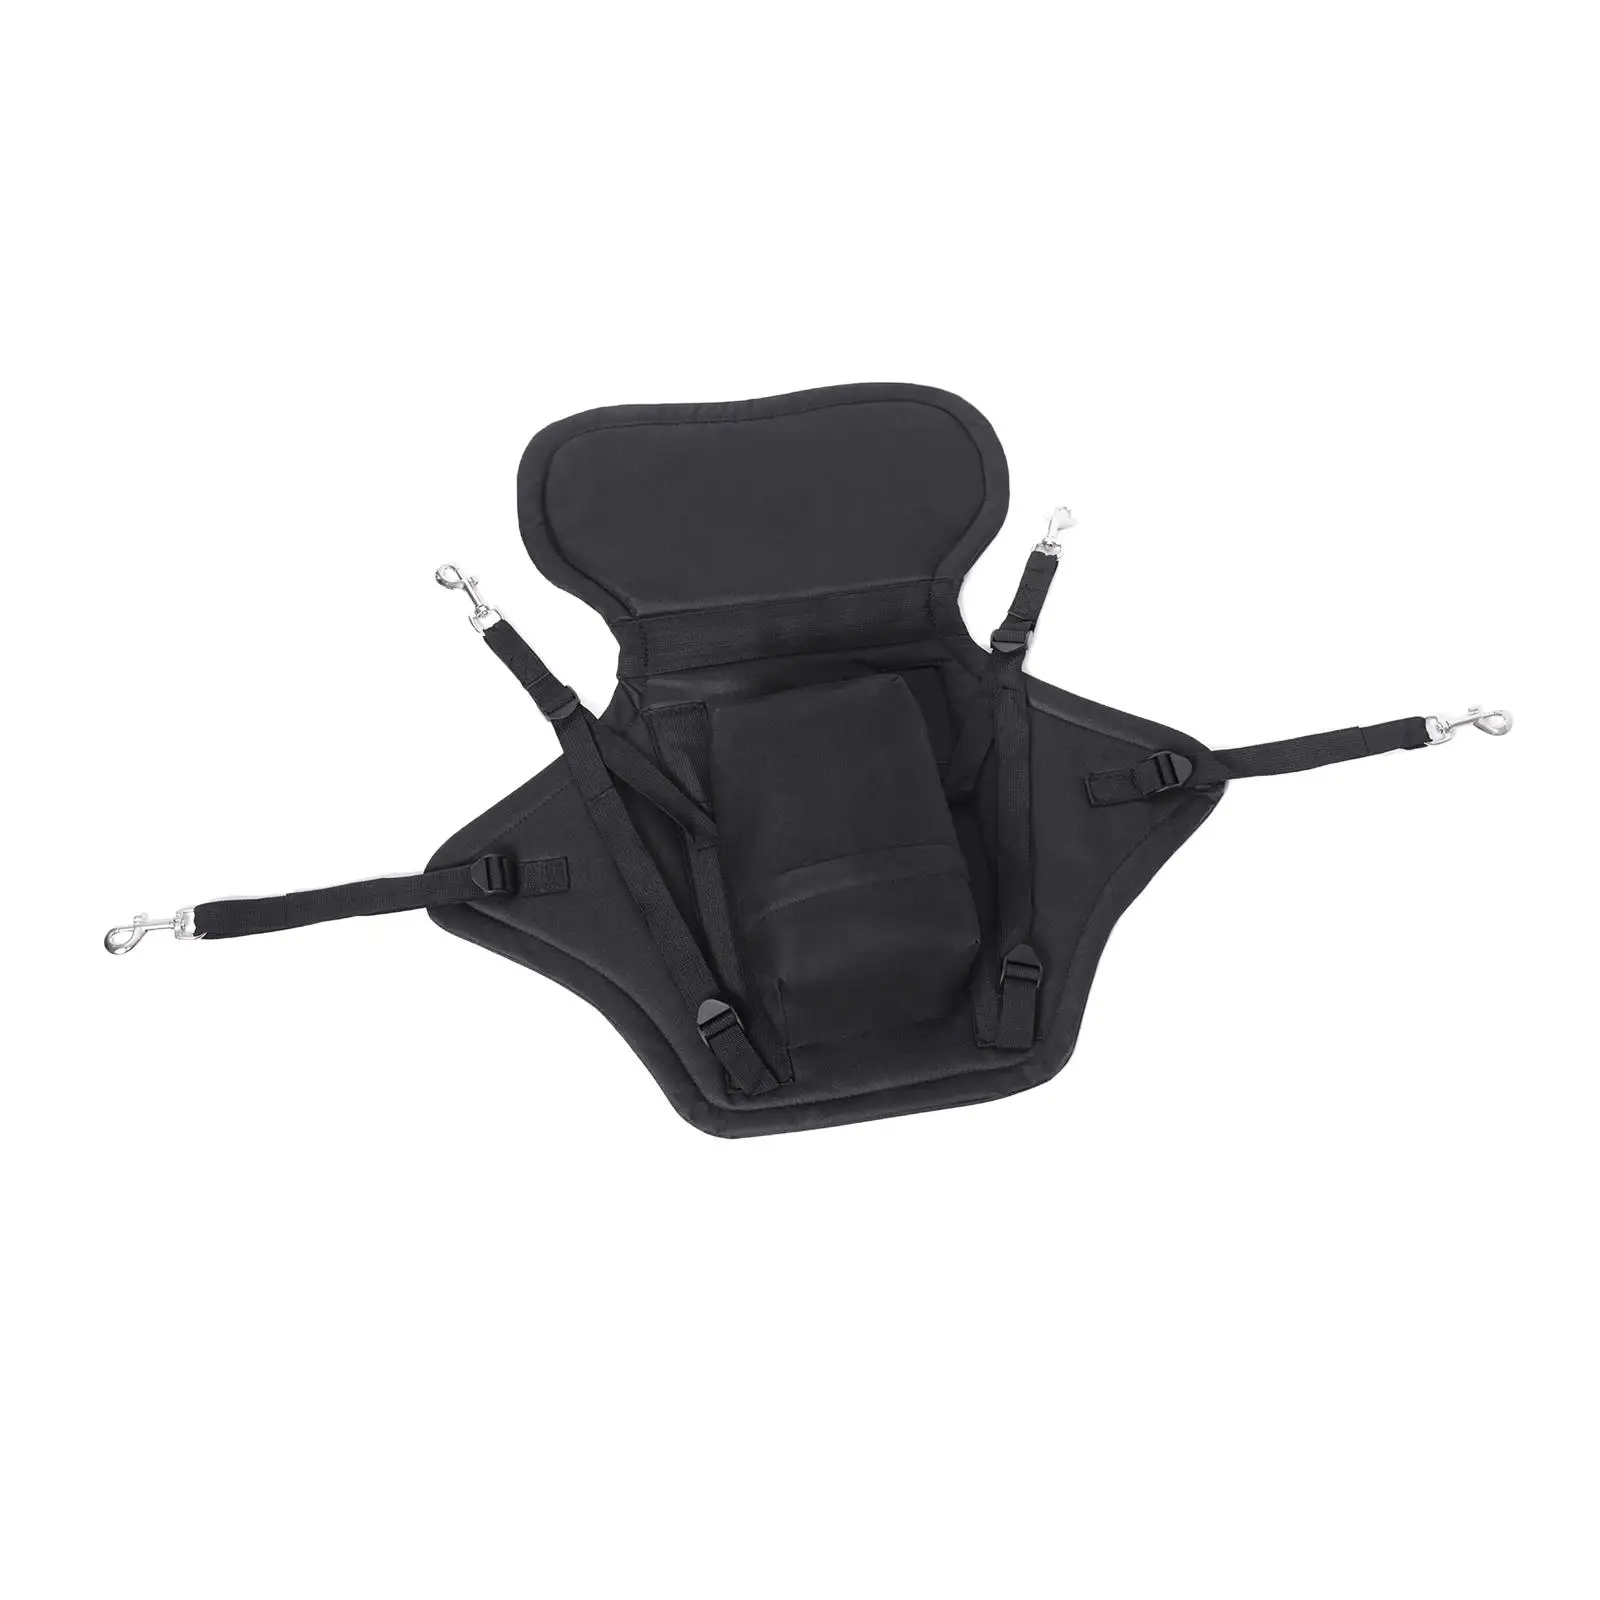 Detachable Canoe Seat Cushion Back Rest Comfortable Luxurious with Support Pad Nylon for Adults Universal Children Kids